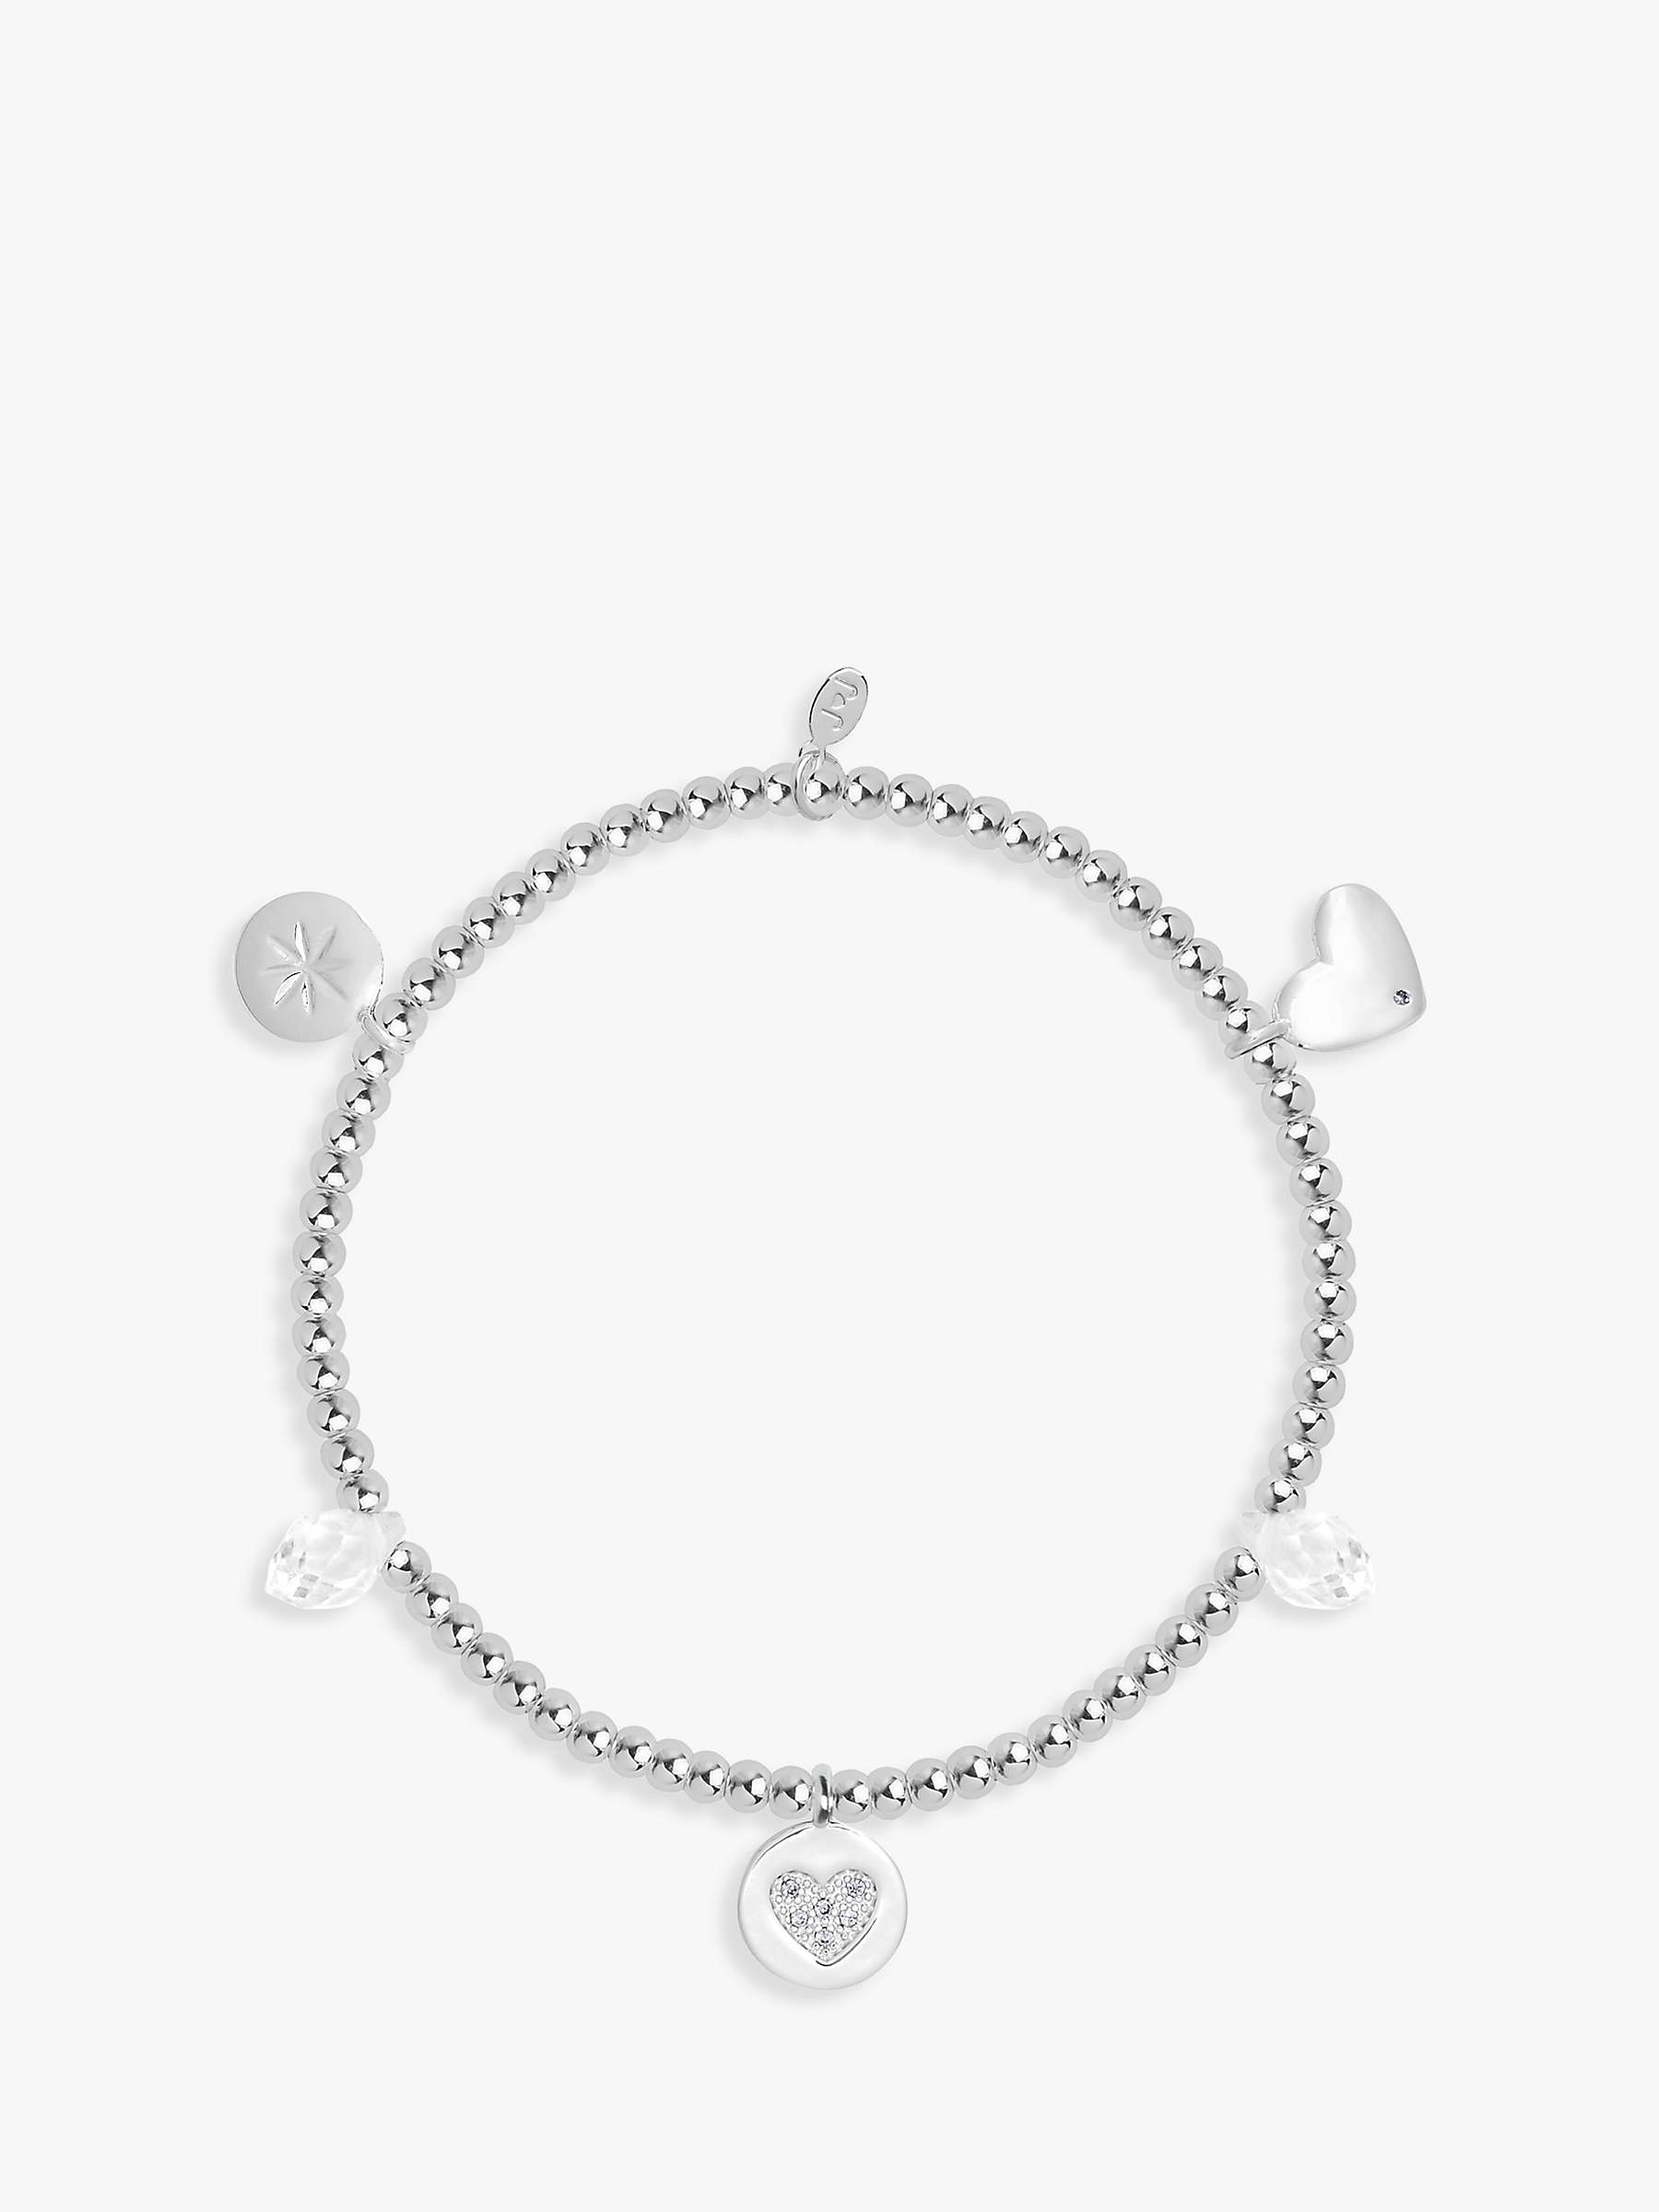 Buy Joma Jewellery With Love Life's A Charm Bracelet, Silver Online at johnlewis.com